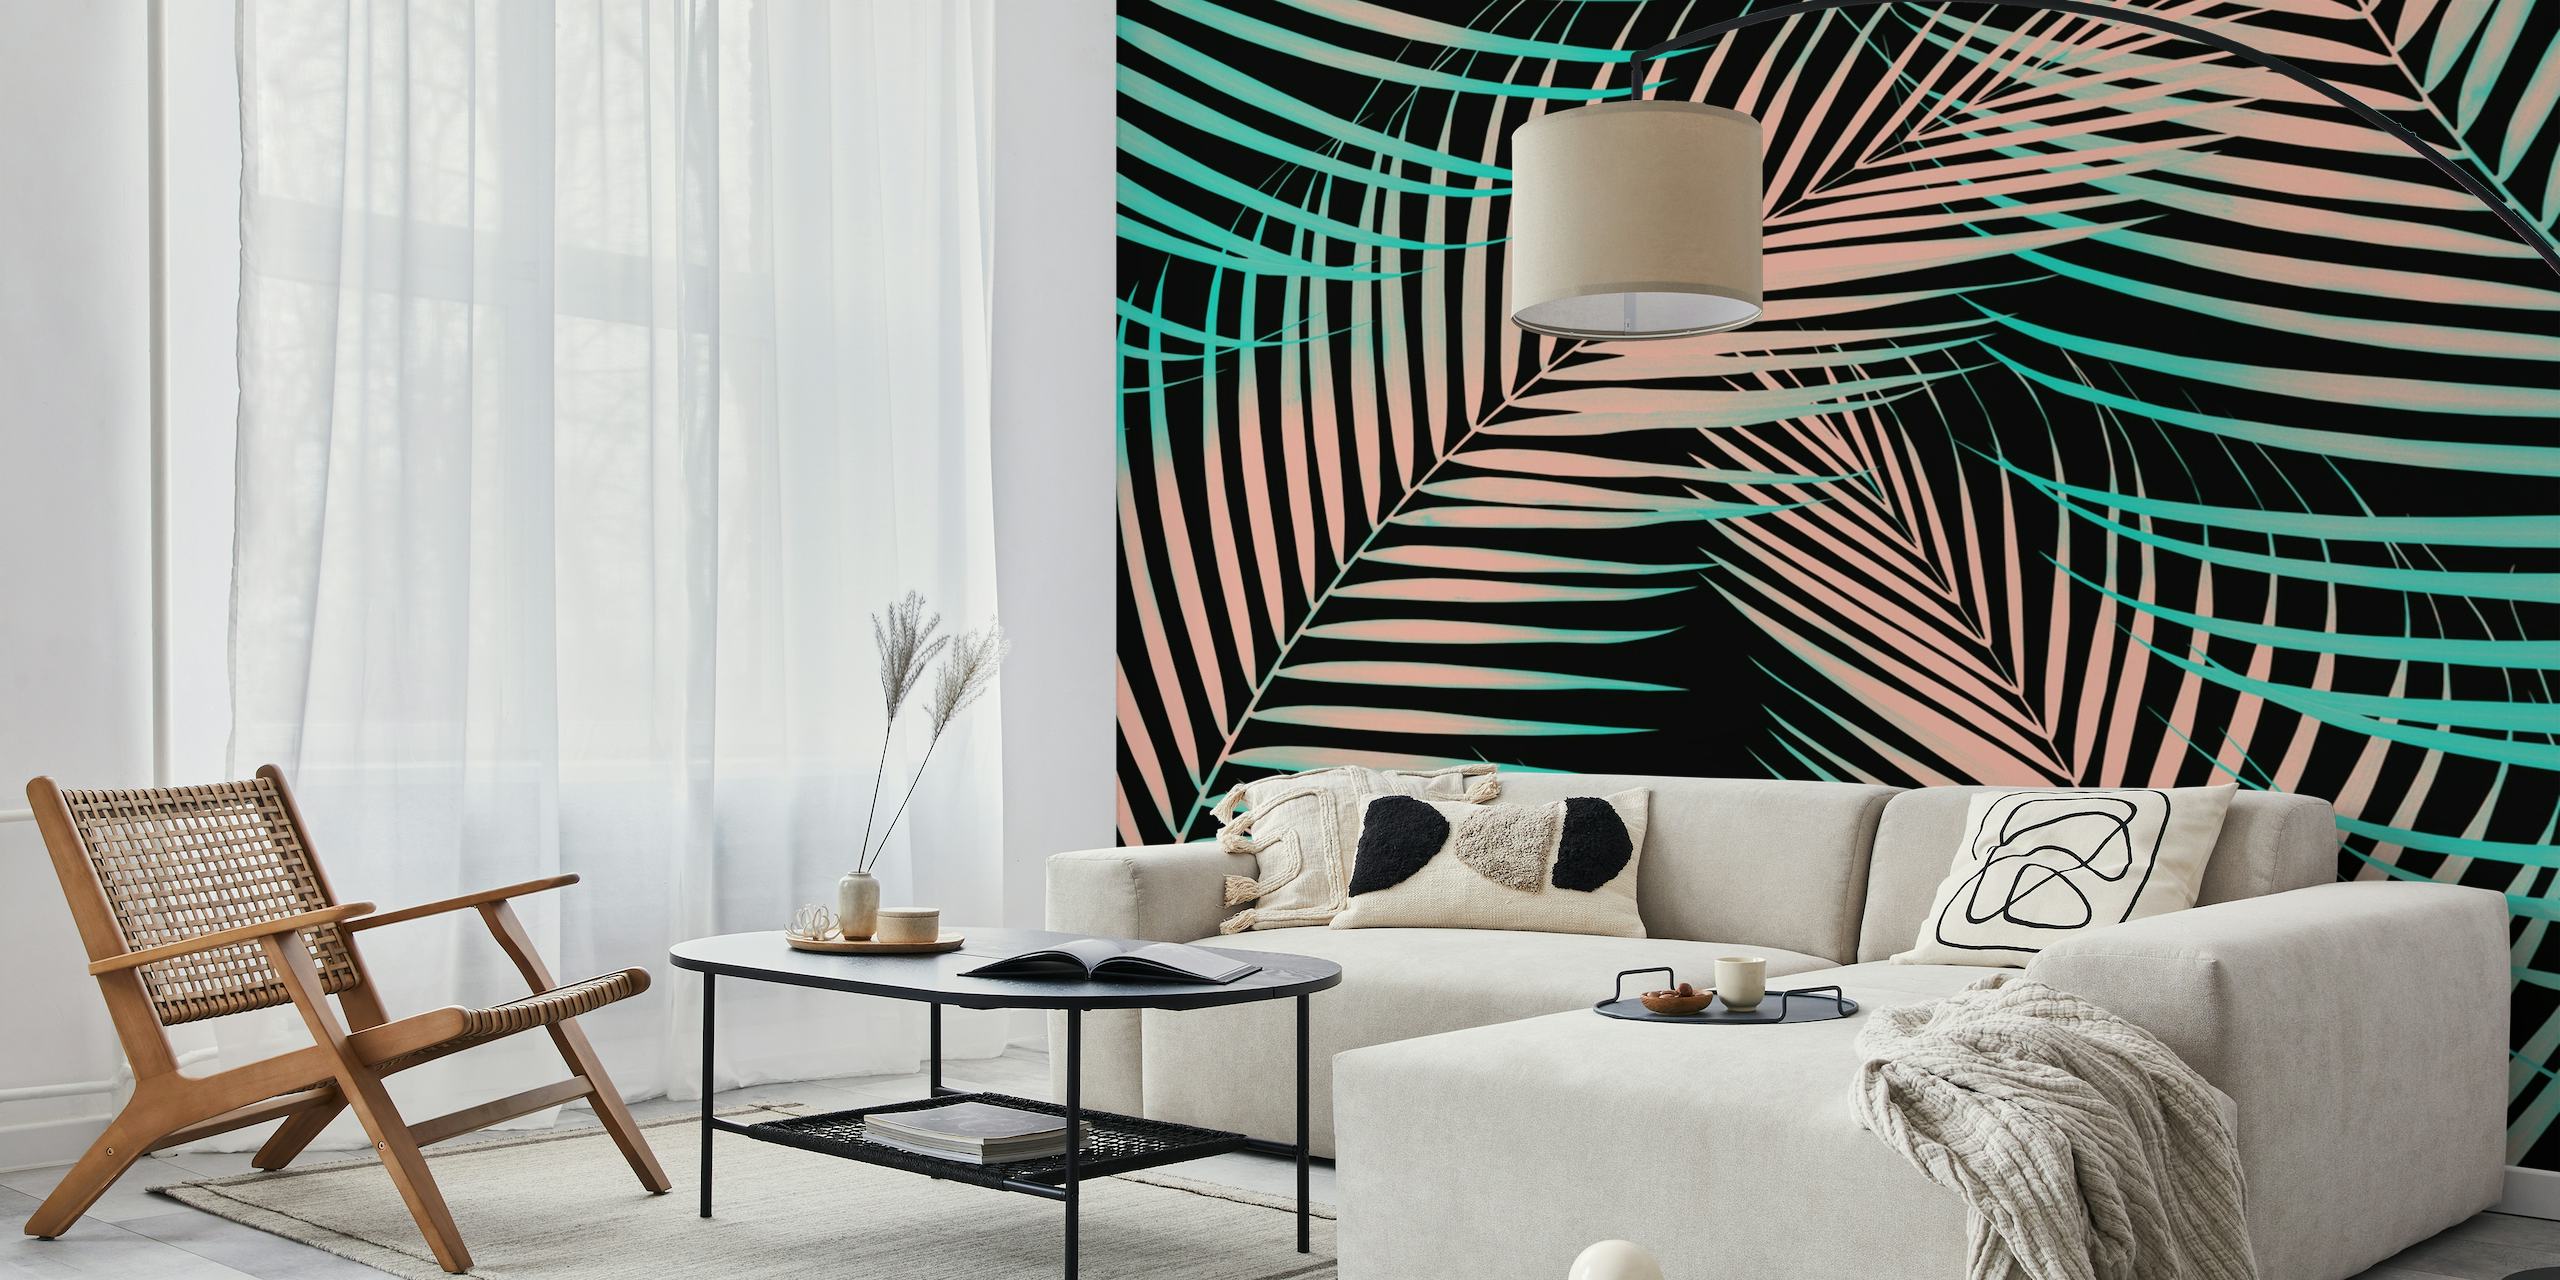 Palm Leaves Cali Vibes wall mural with tropical palm leaf patterns